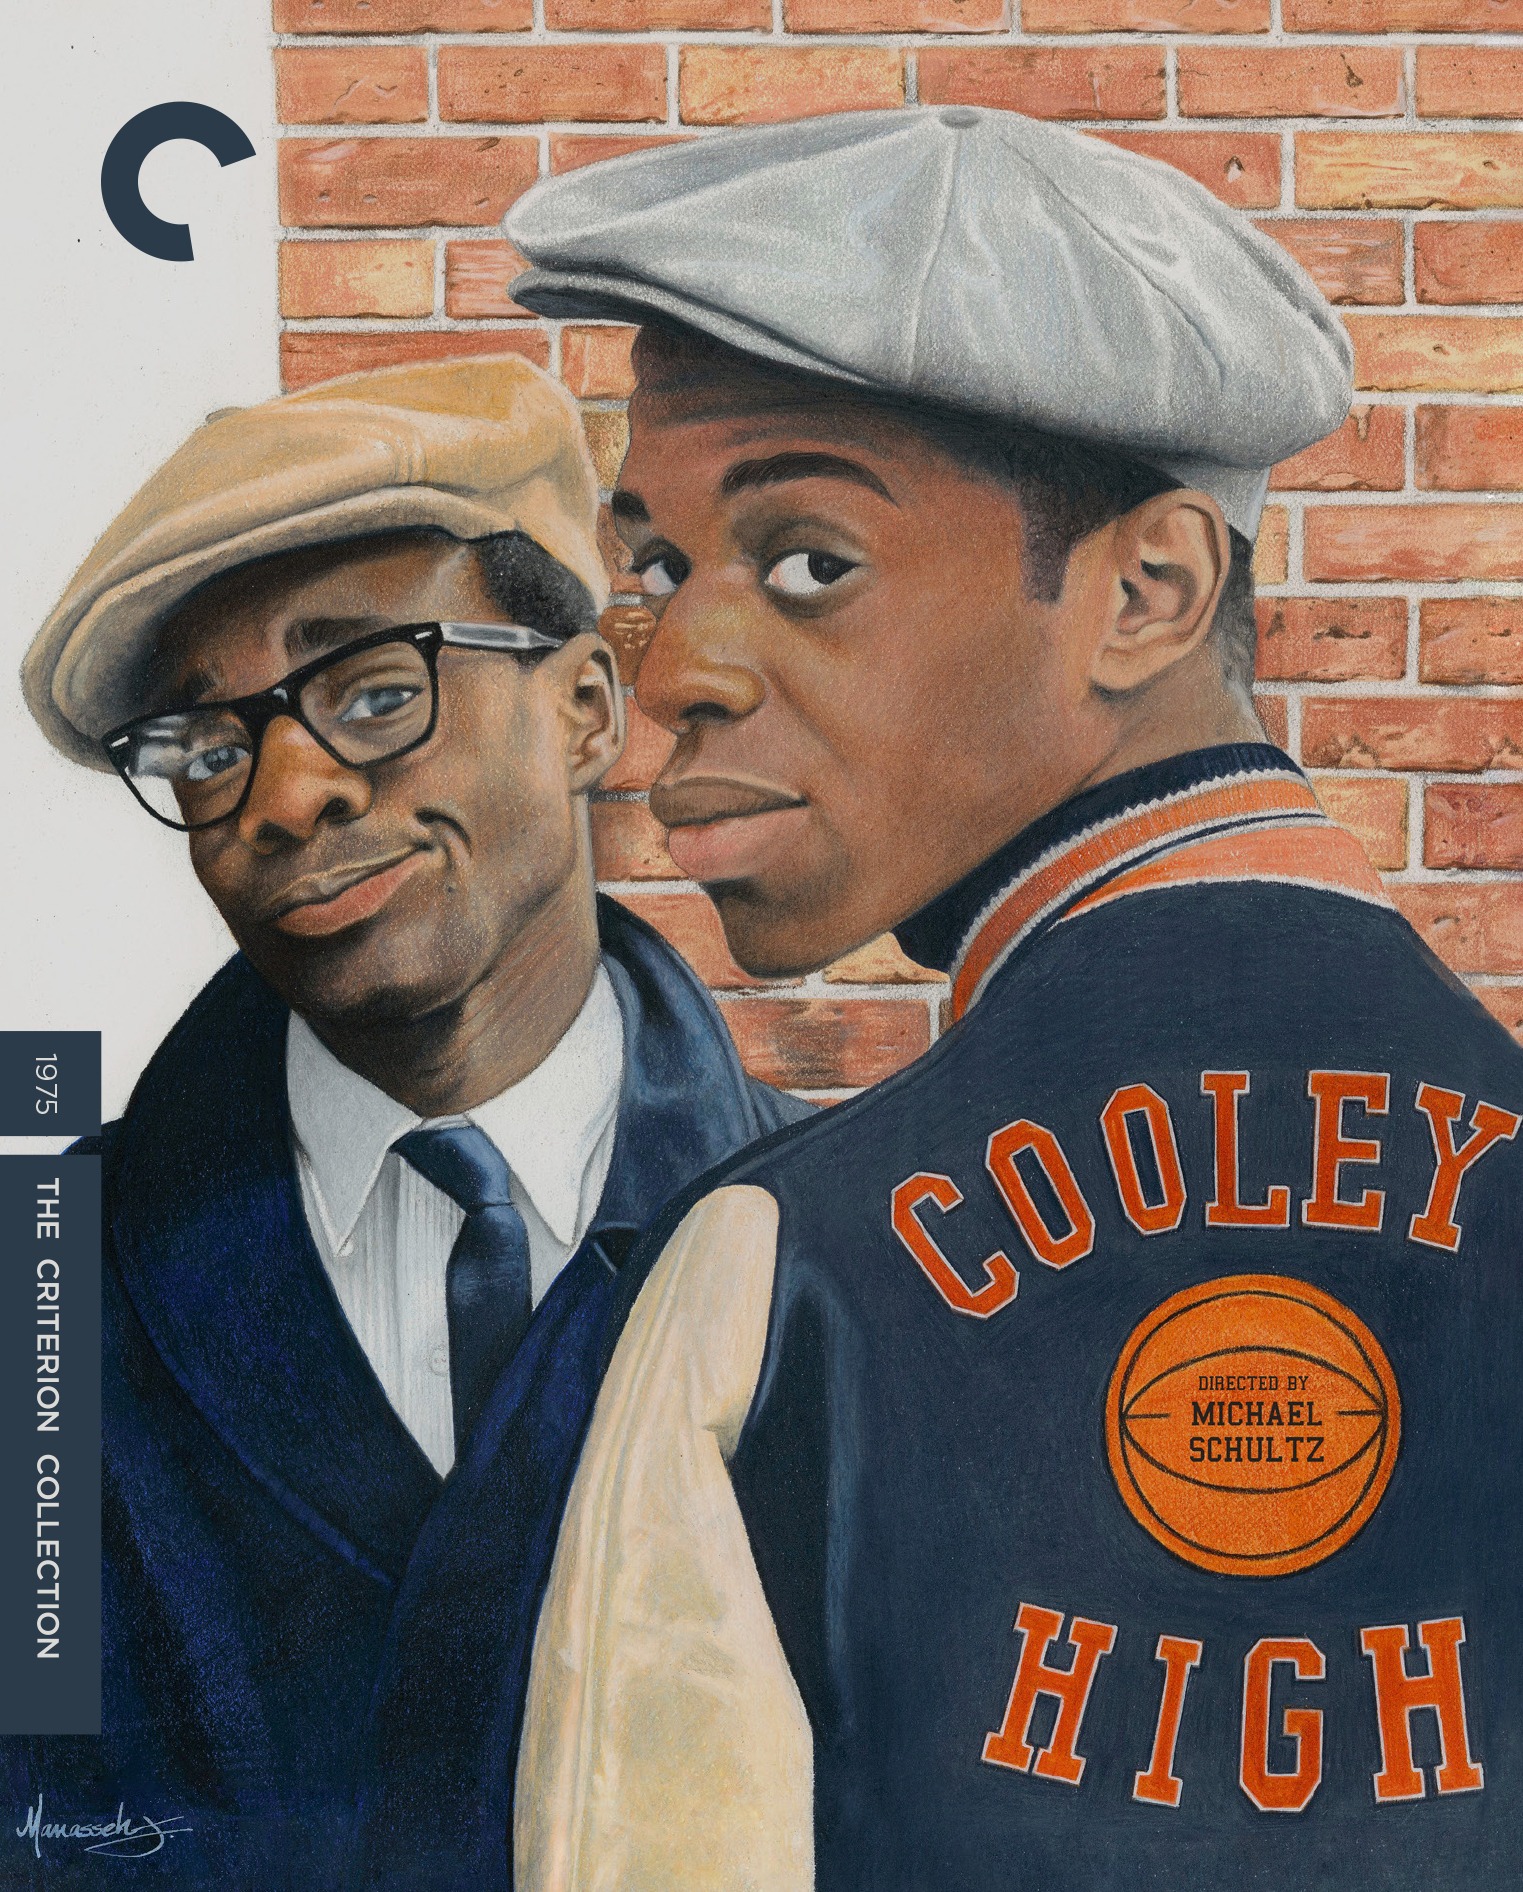 Why Are There So Few Movies by Black Directors in the Criterion Collection?